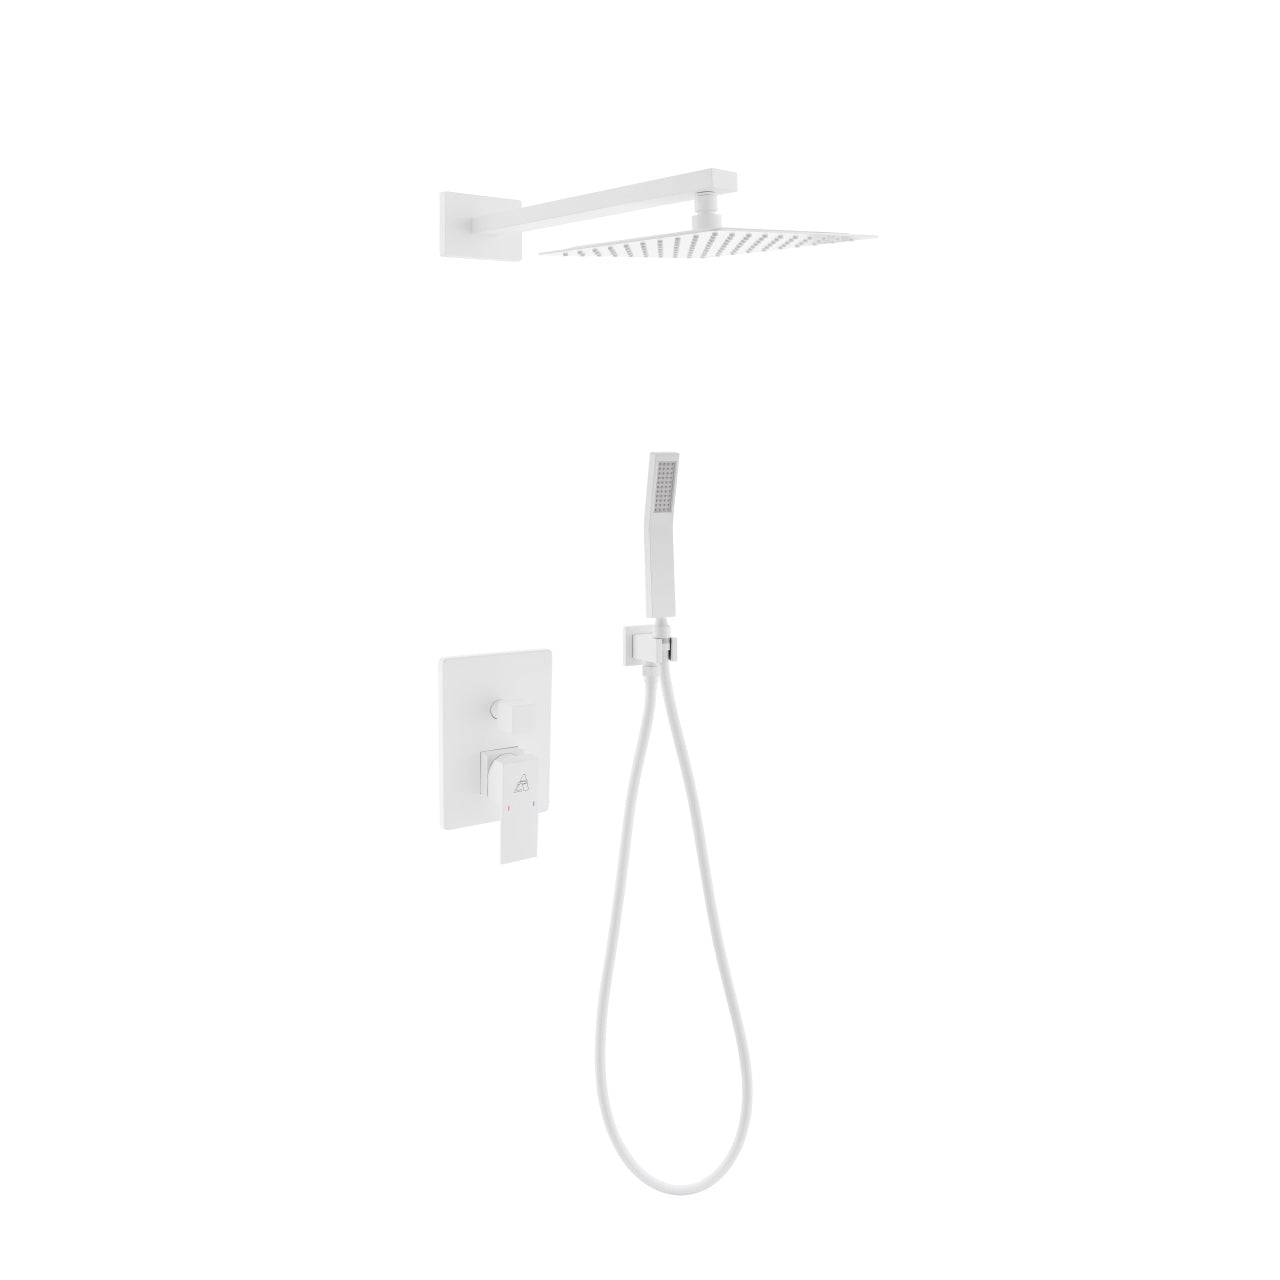 Aqua Piazza Brass Shower Set with Square Rain Shower and Handheld - Home and Bath Depot